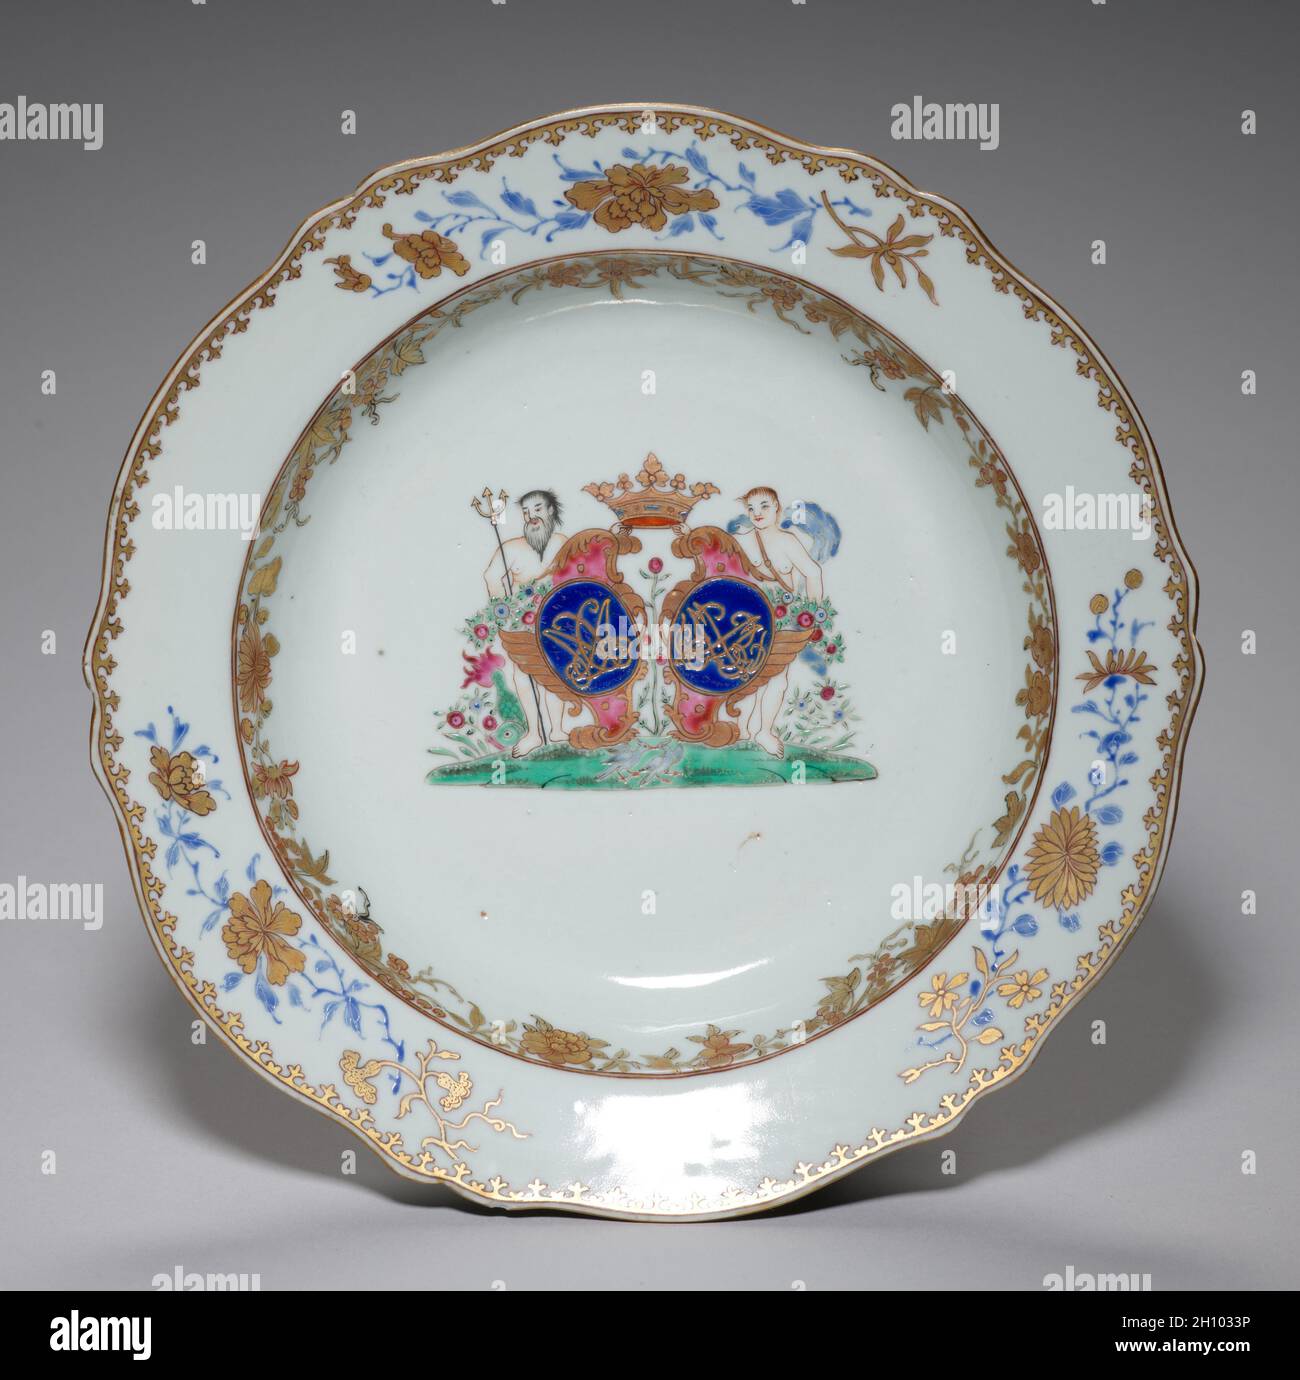 https://c8.alamy.com/comp/2H1033P/soup-plate-1760-1770-china-chinese-export-18th-century-porcelain-diameter-229-cm-9-in-2H1033P.jpg